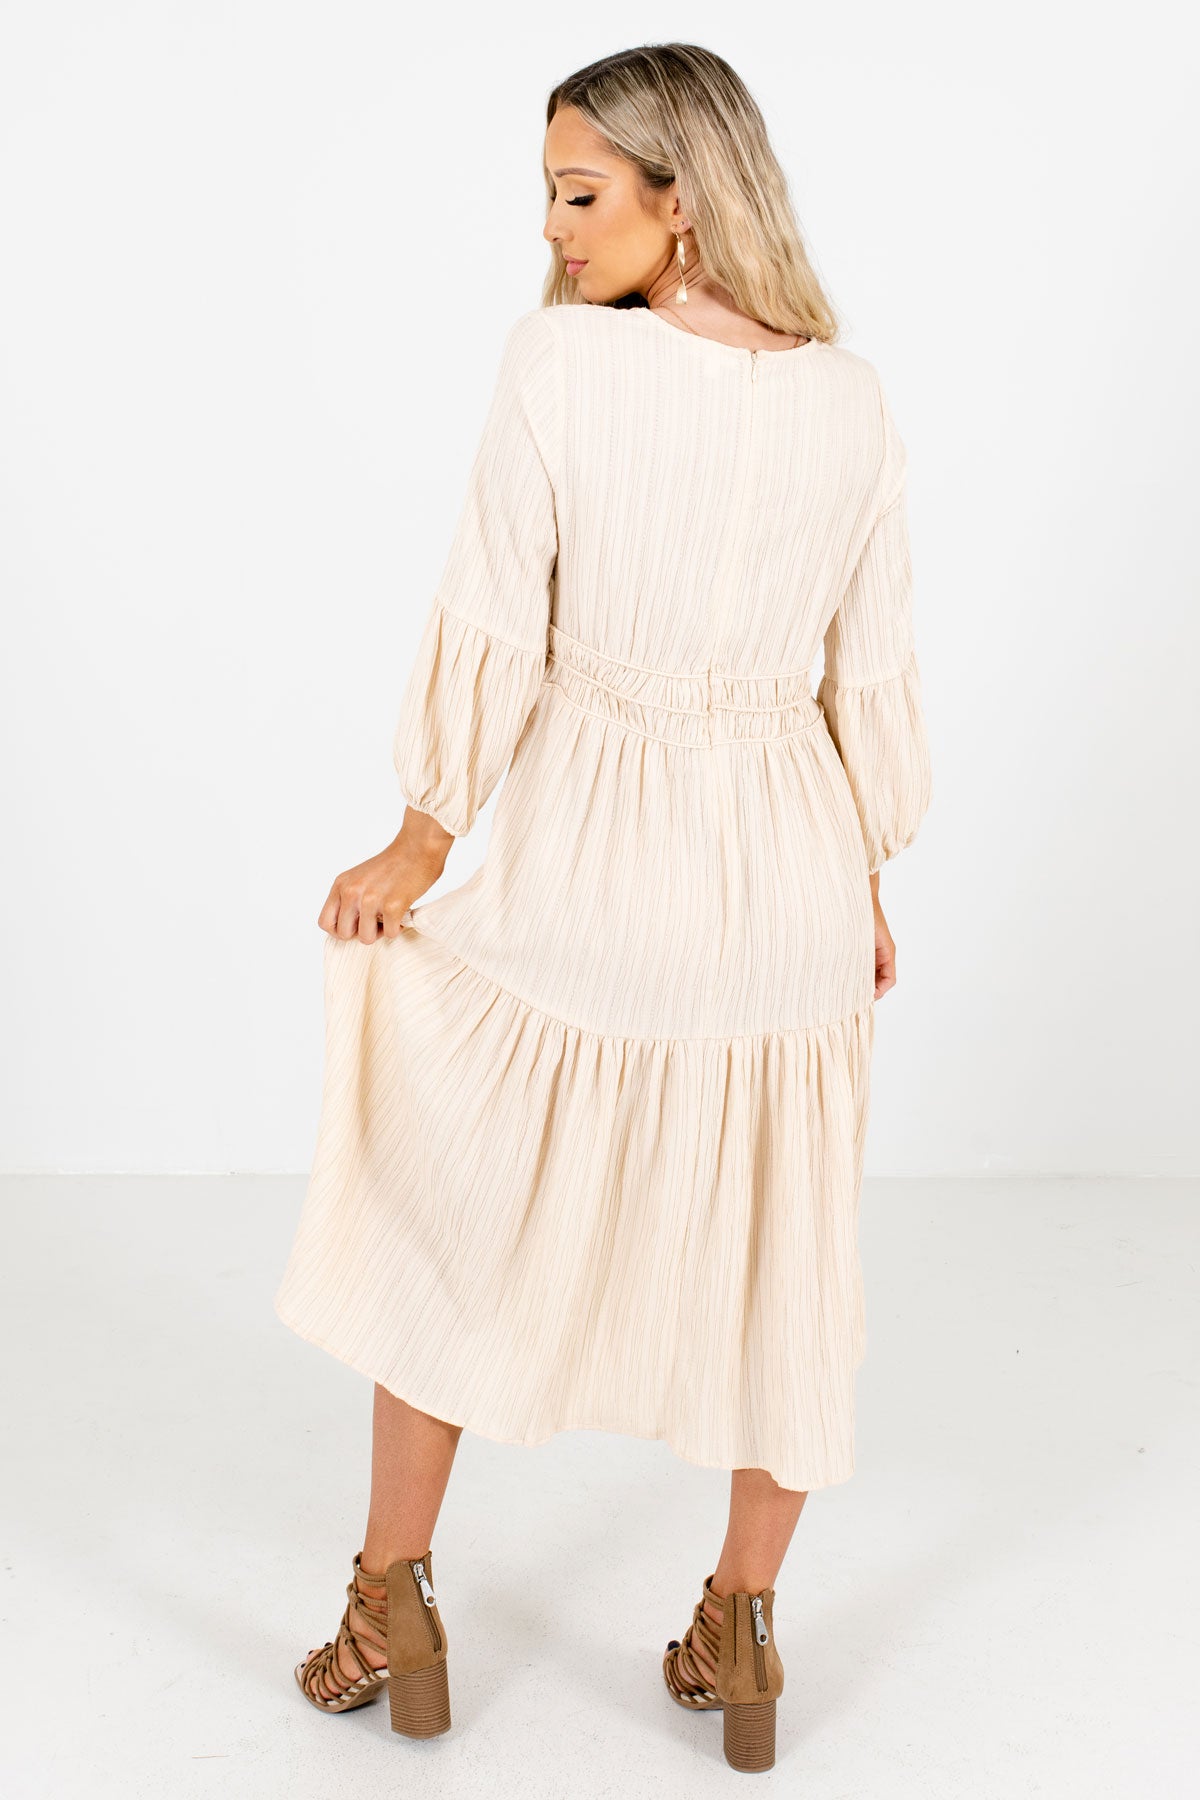 Women's Cream High-Quality Textured Material Boutique Midi Dress